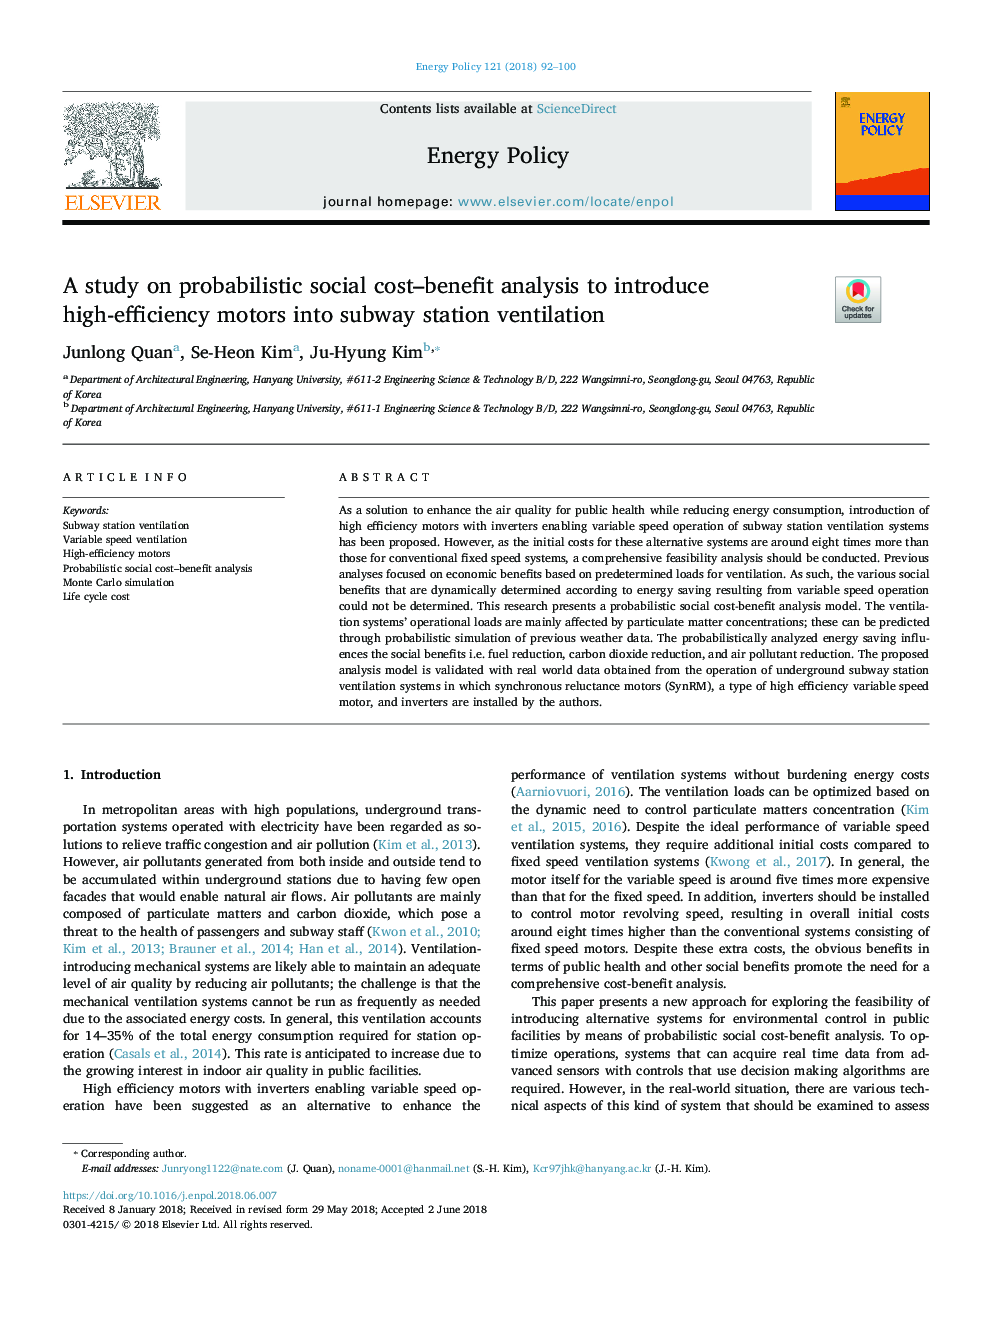 A study on probabilistic social cost-benefit analysis to introduce high-efficiency motors into subway station ventilation